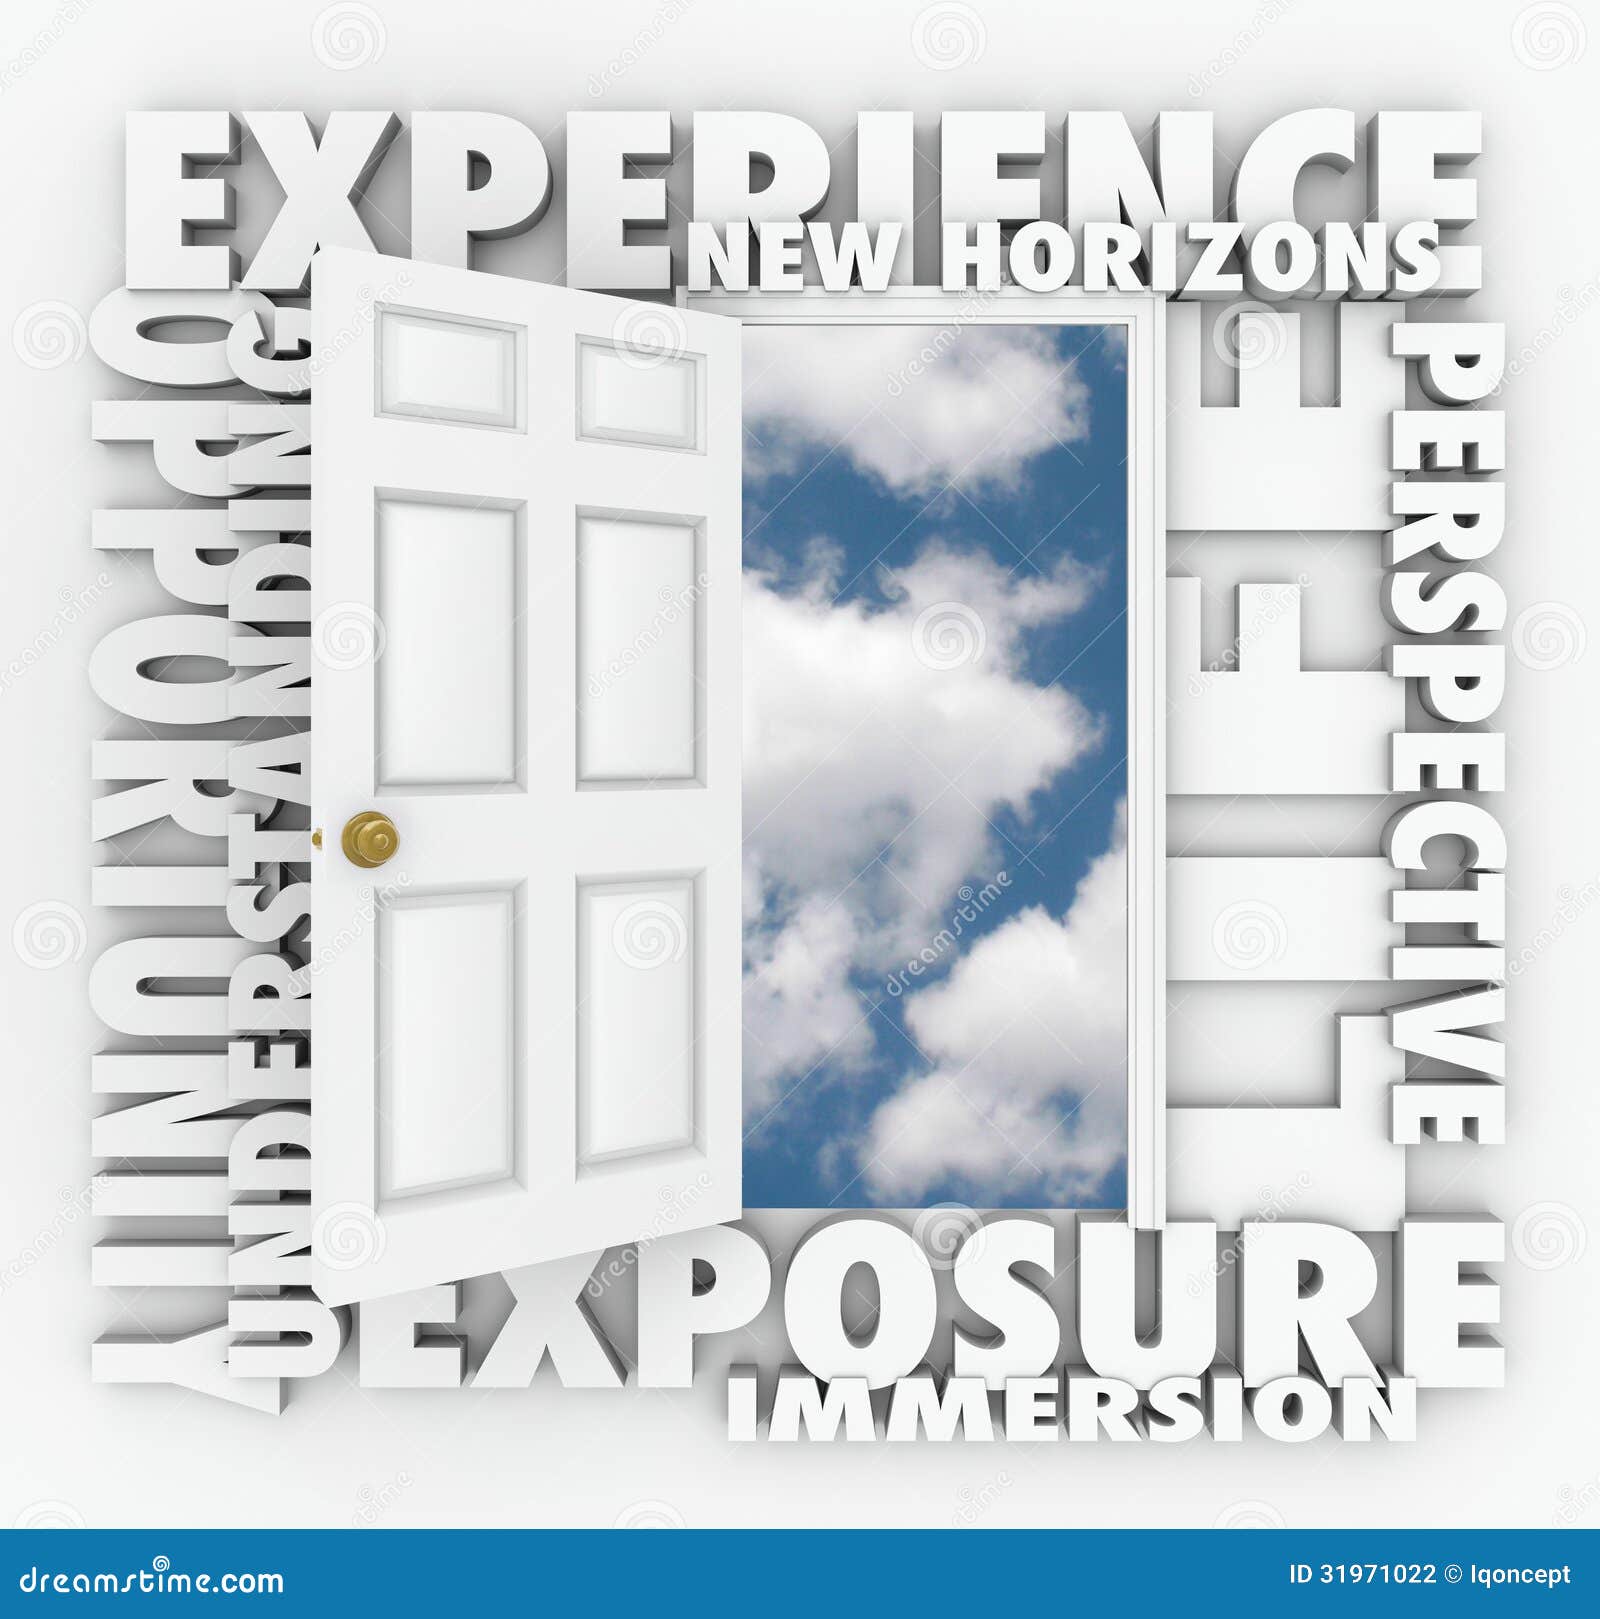 experience new horizons door opens leading to opportunity